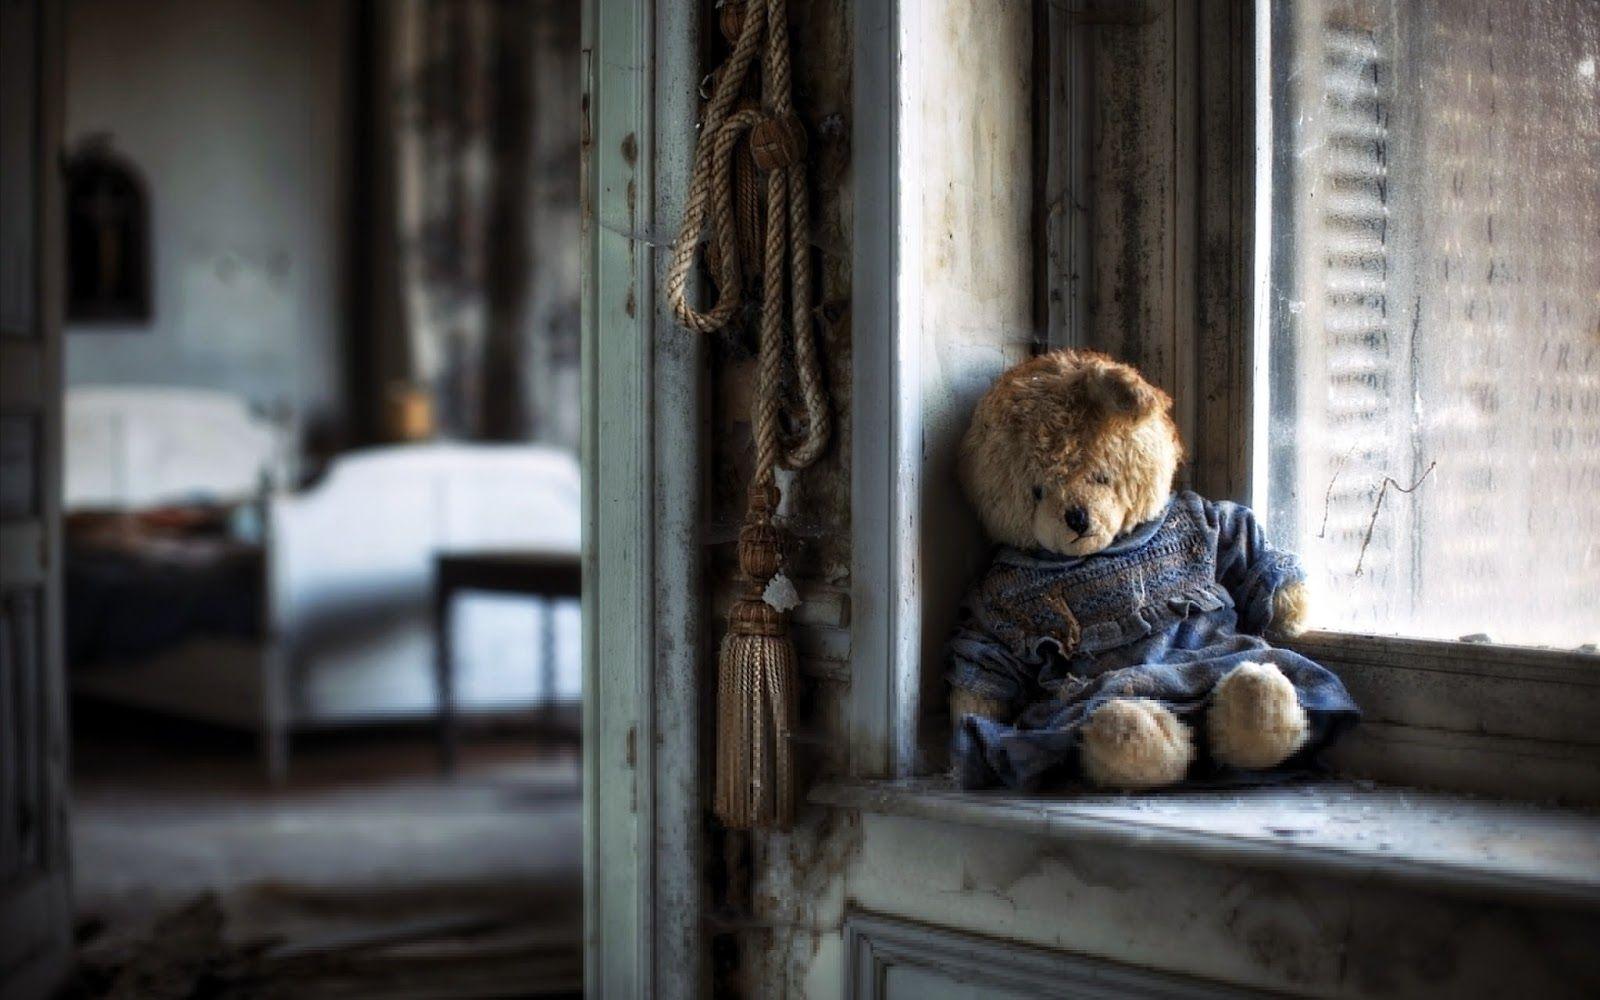 Miss you face photo of sad teddy bear upset and sitting alone